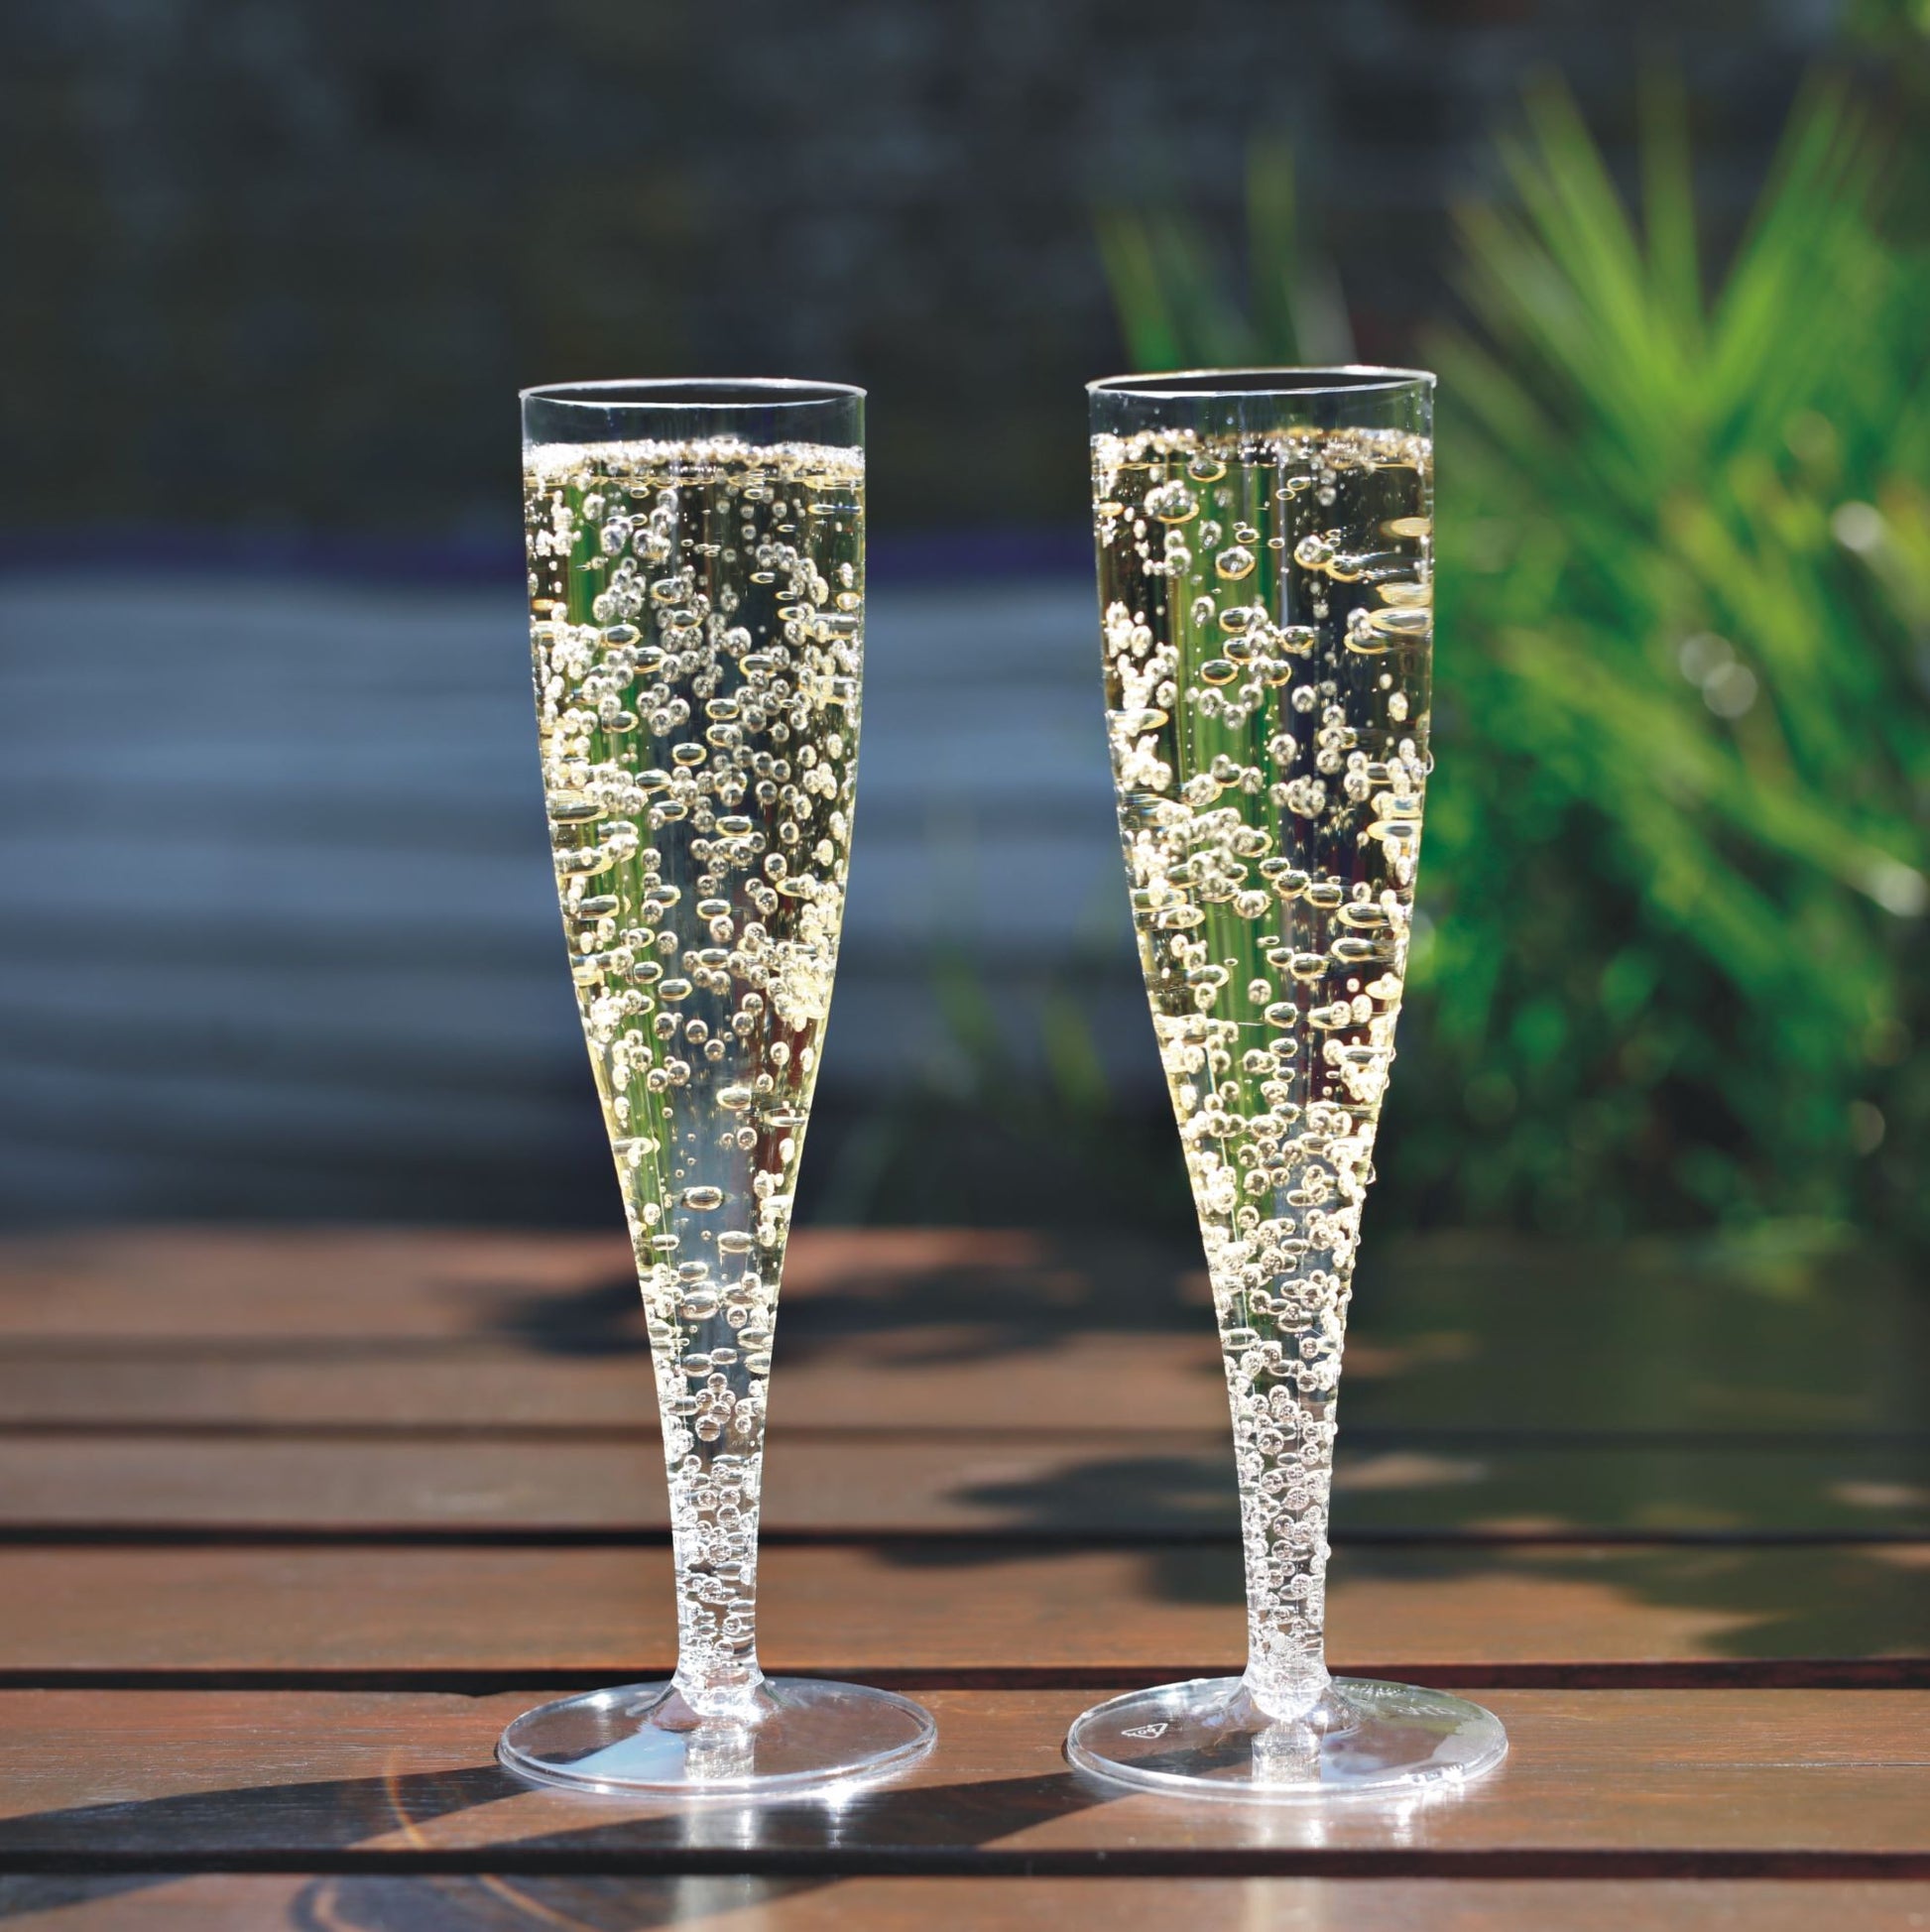 100 x Clear Prosecco Flutes 175ml 6oz Capacity Recyclable Polystyrene Material Transparent 1-Piece Sturdy Champagne Glasses BBQs Picnics-5056020107095-PCUP-CHAMPx10-Product Pro-Champagne Glasses, Clear Champagne Glasses, Plastic Flutes, Prosecco Flutes, Transparent